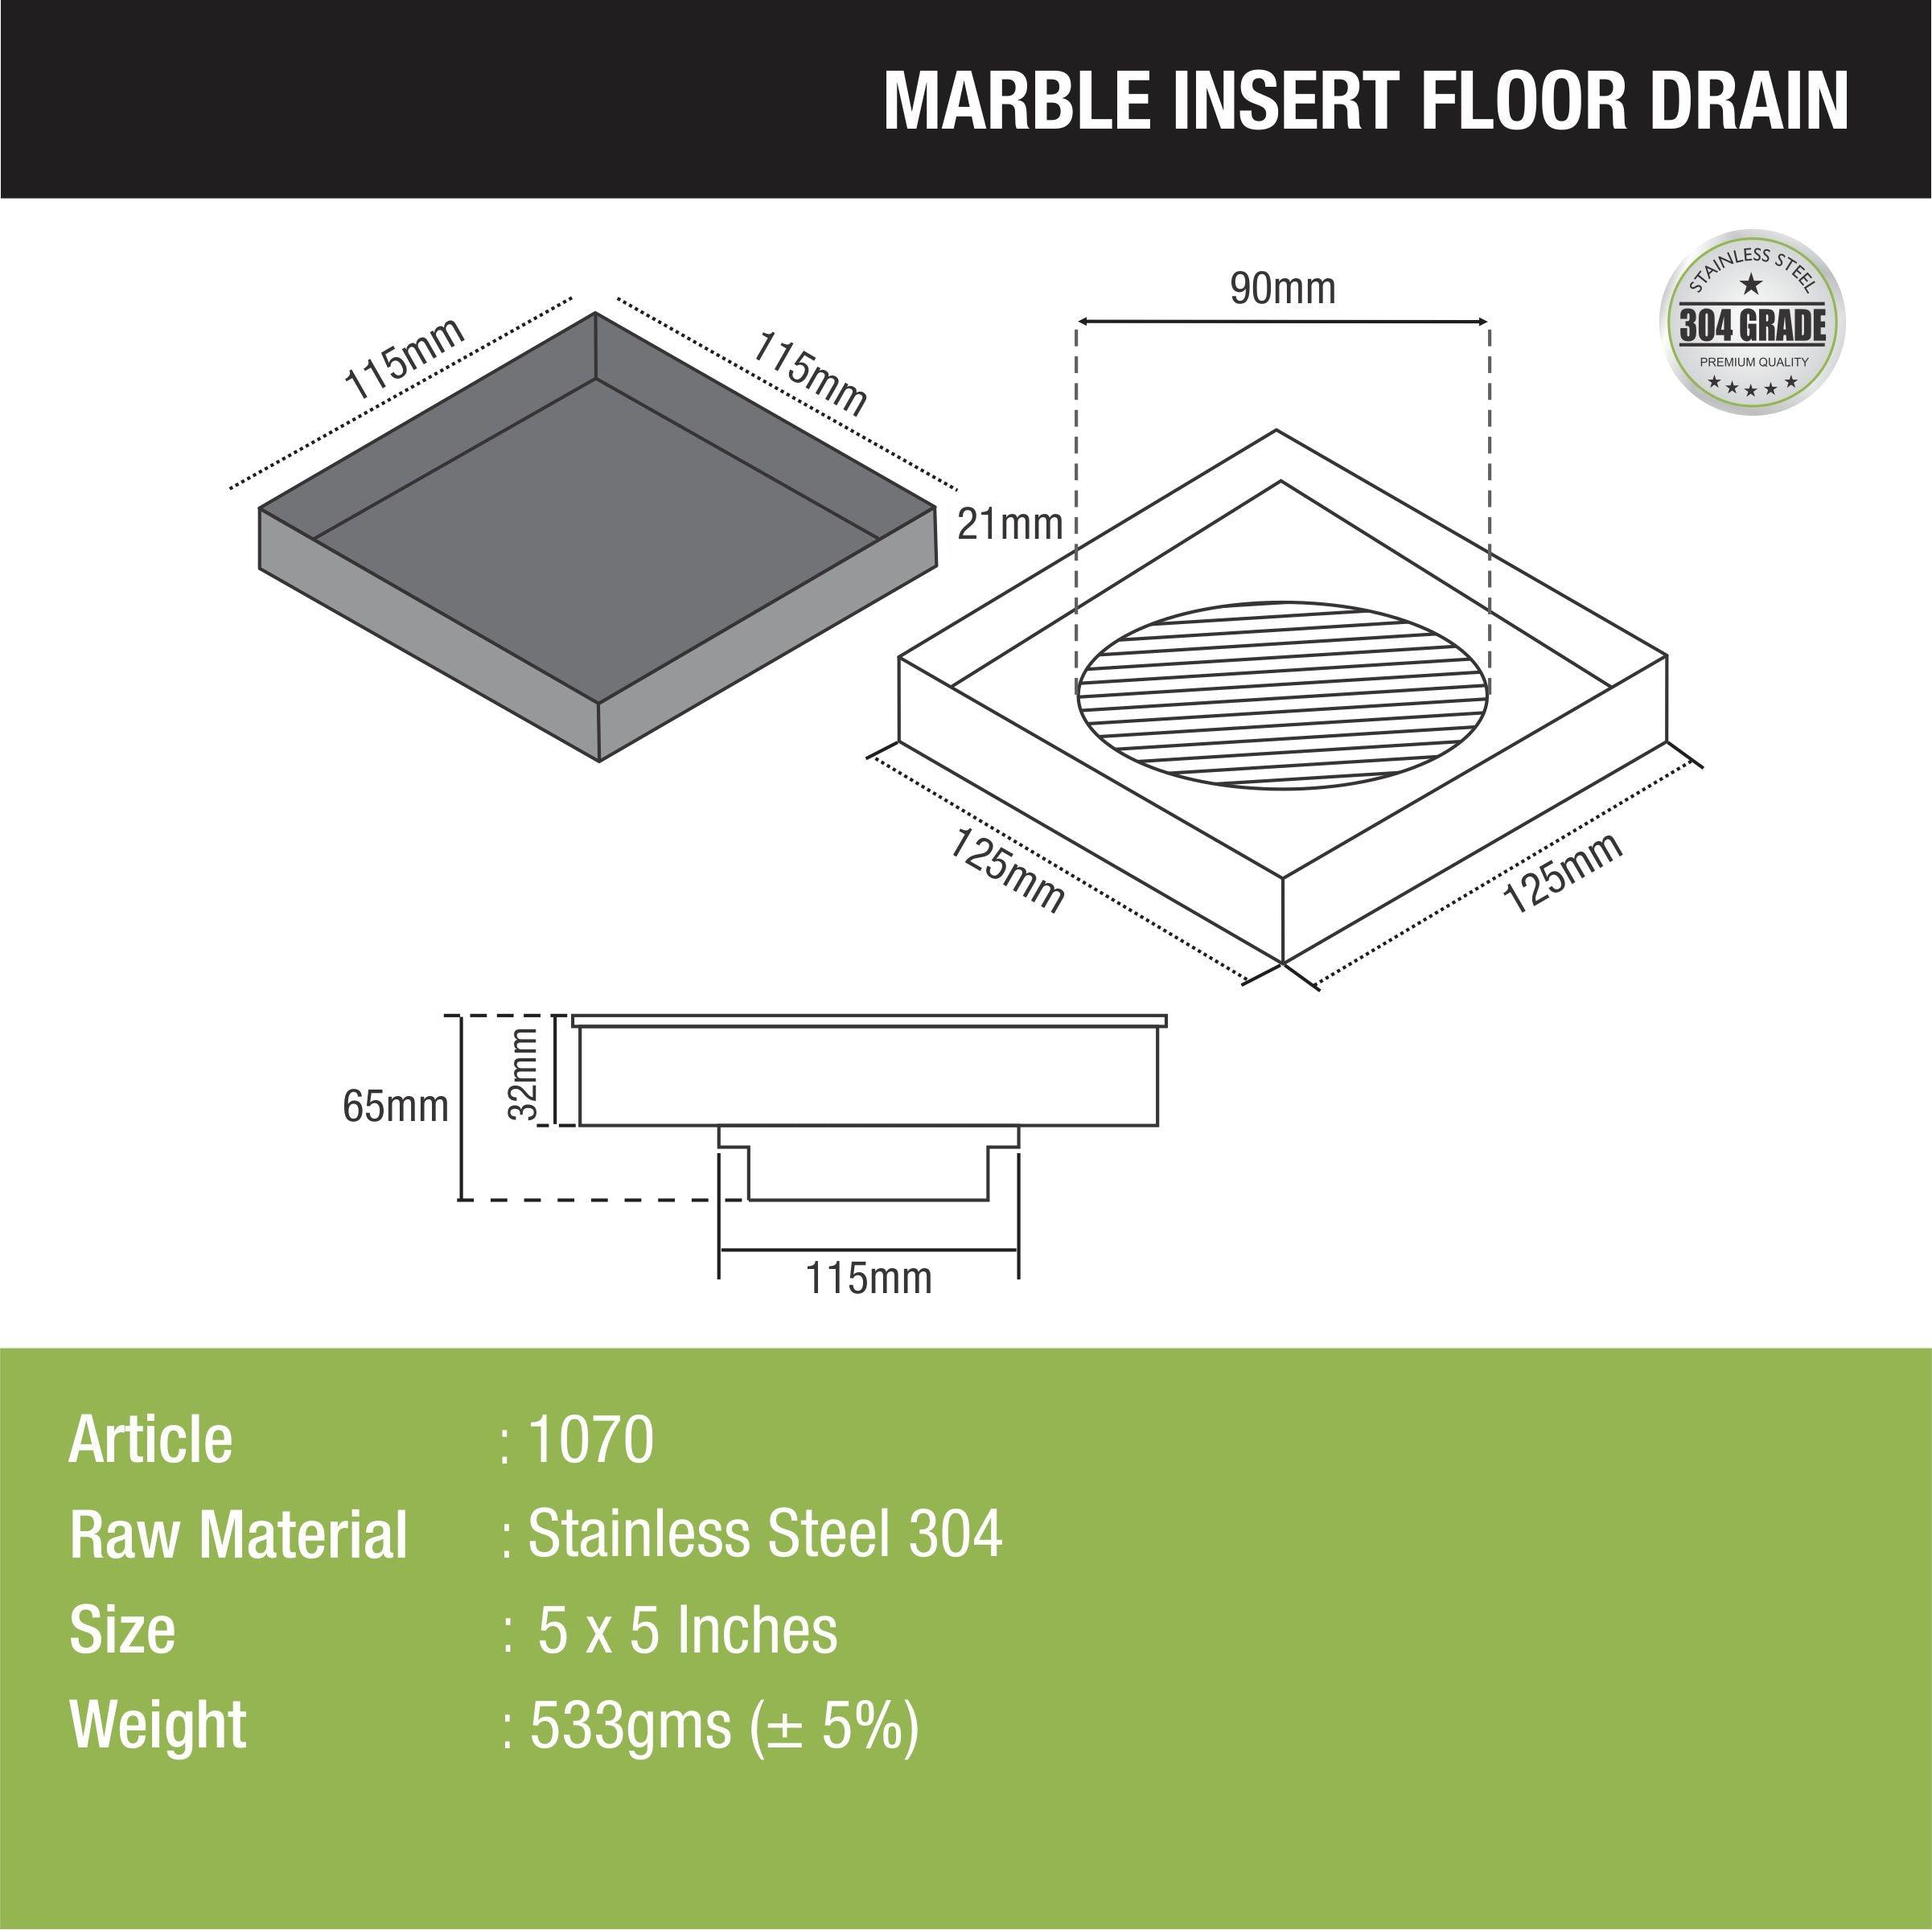 Marble Insert Floor Drain (5 x 5 Inches) dimensions and sizes